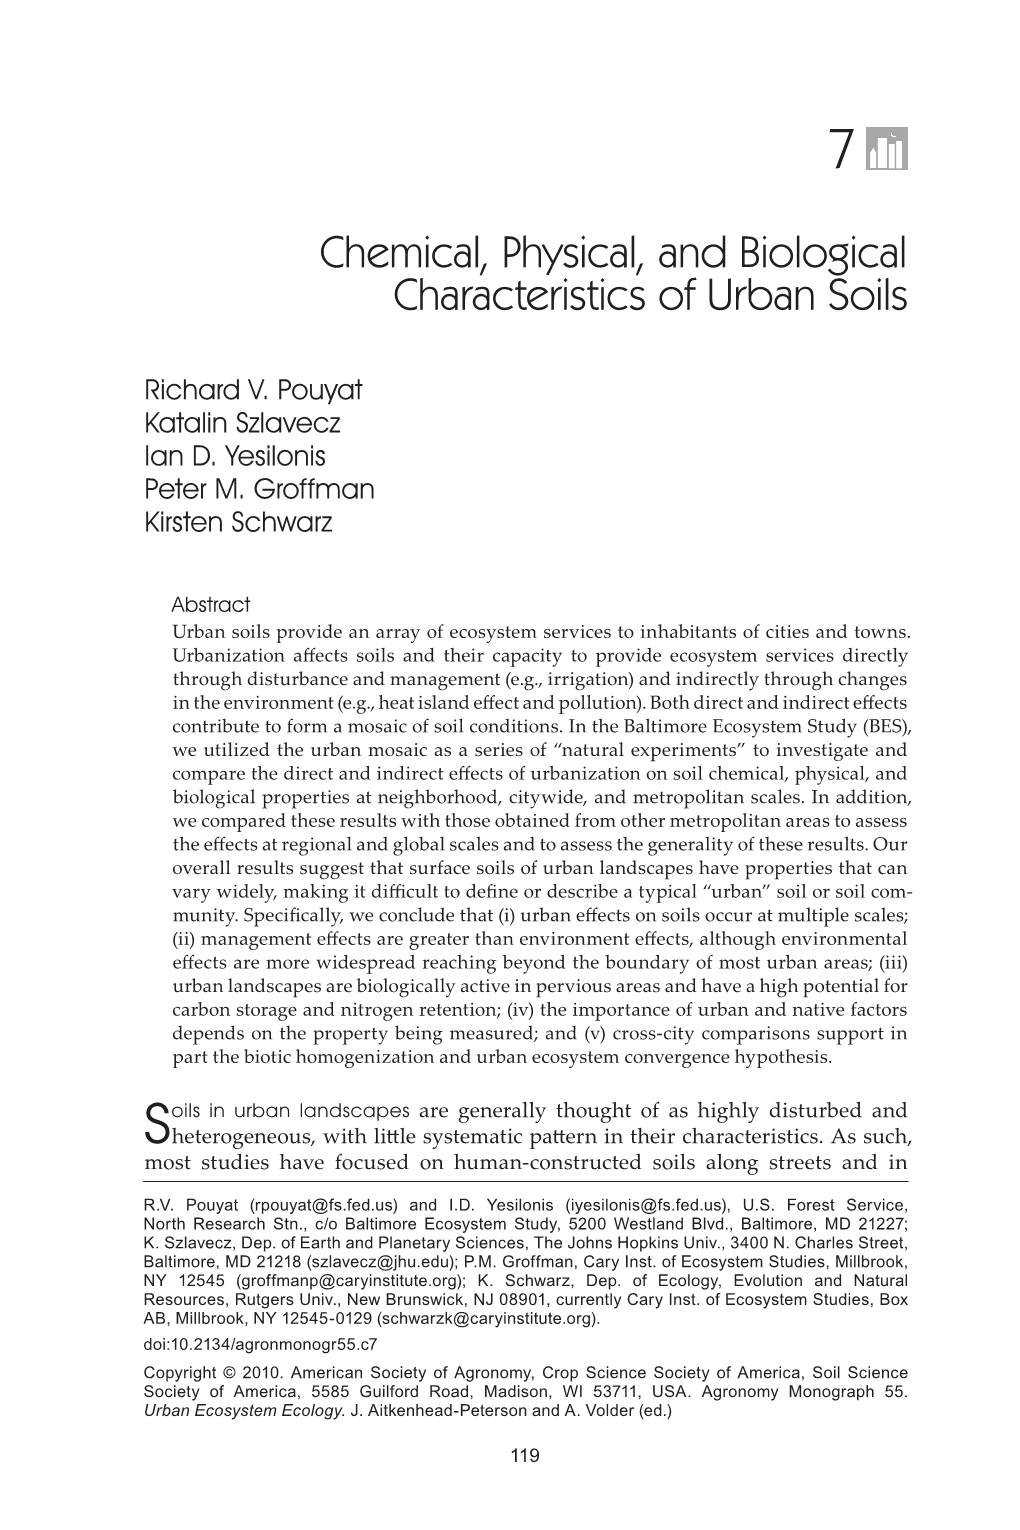 Chemical, Physical, and Biological Characteristics of Urban Soils